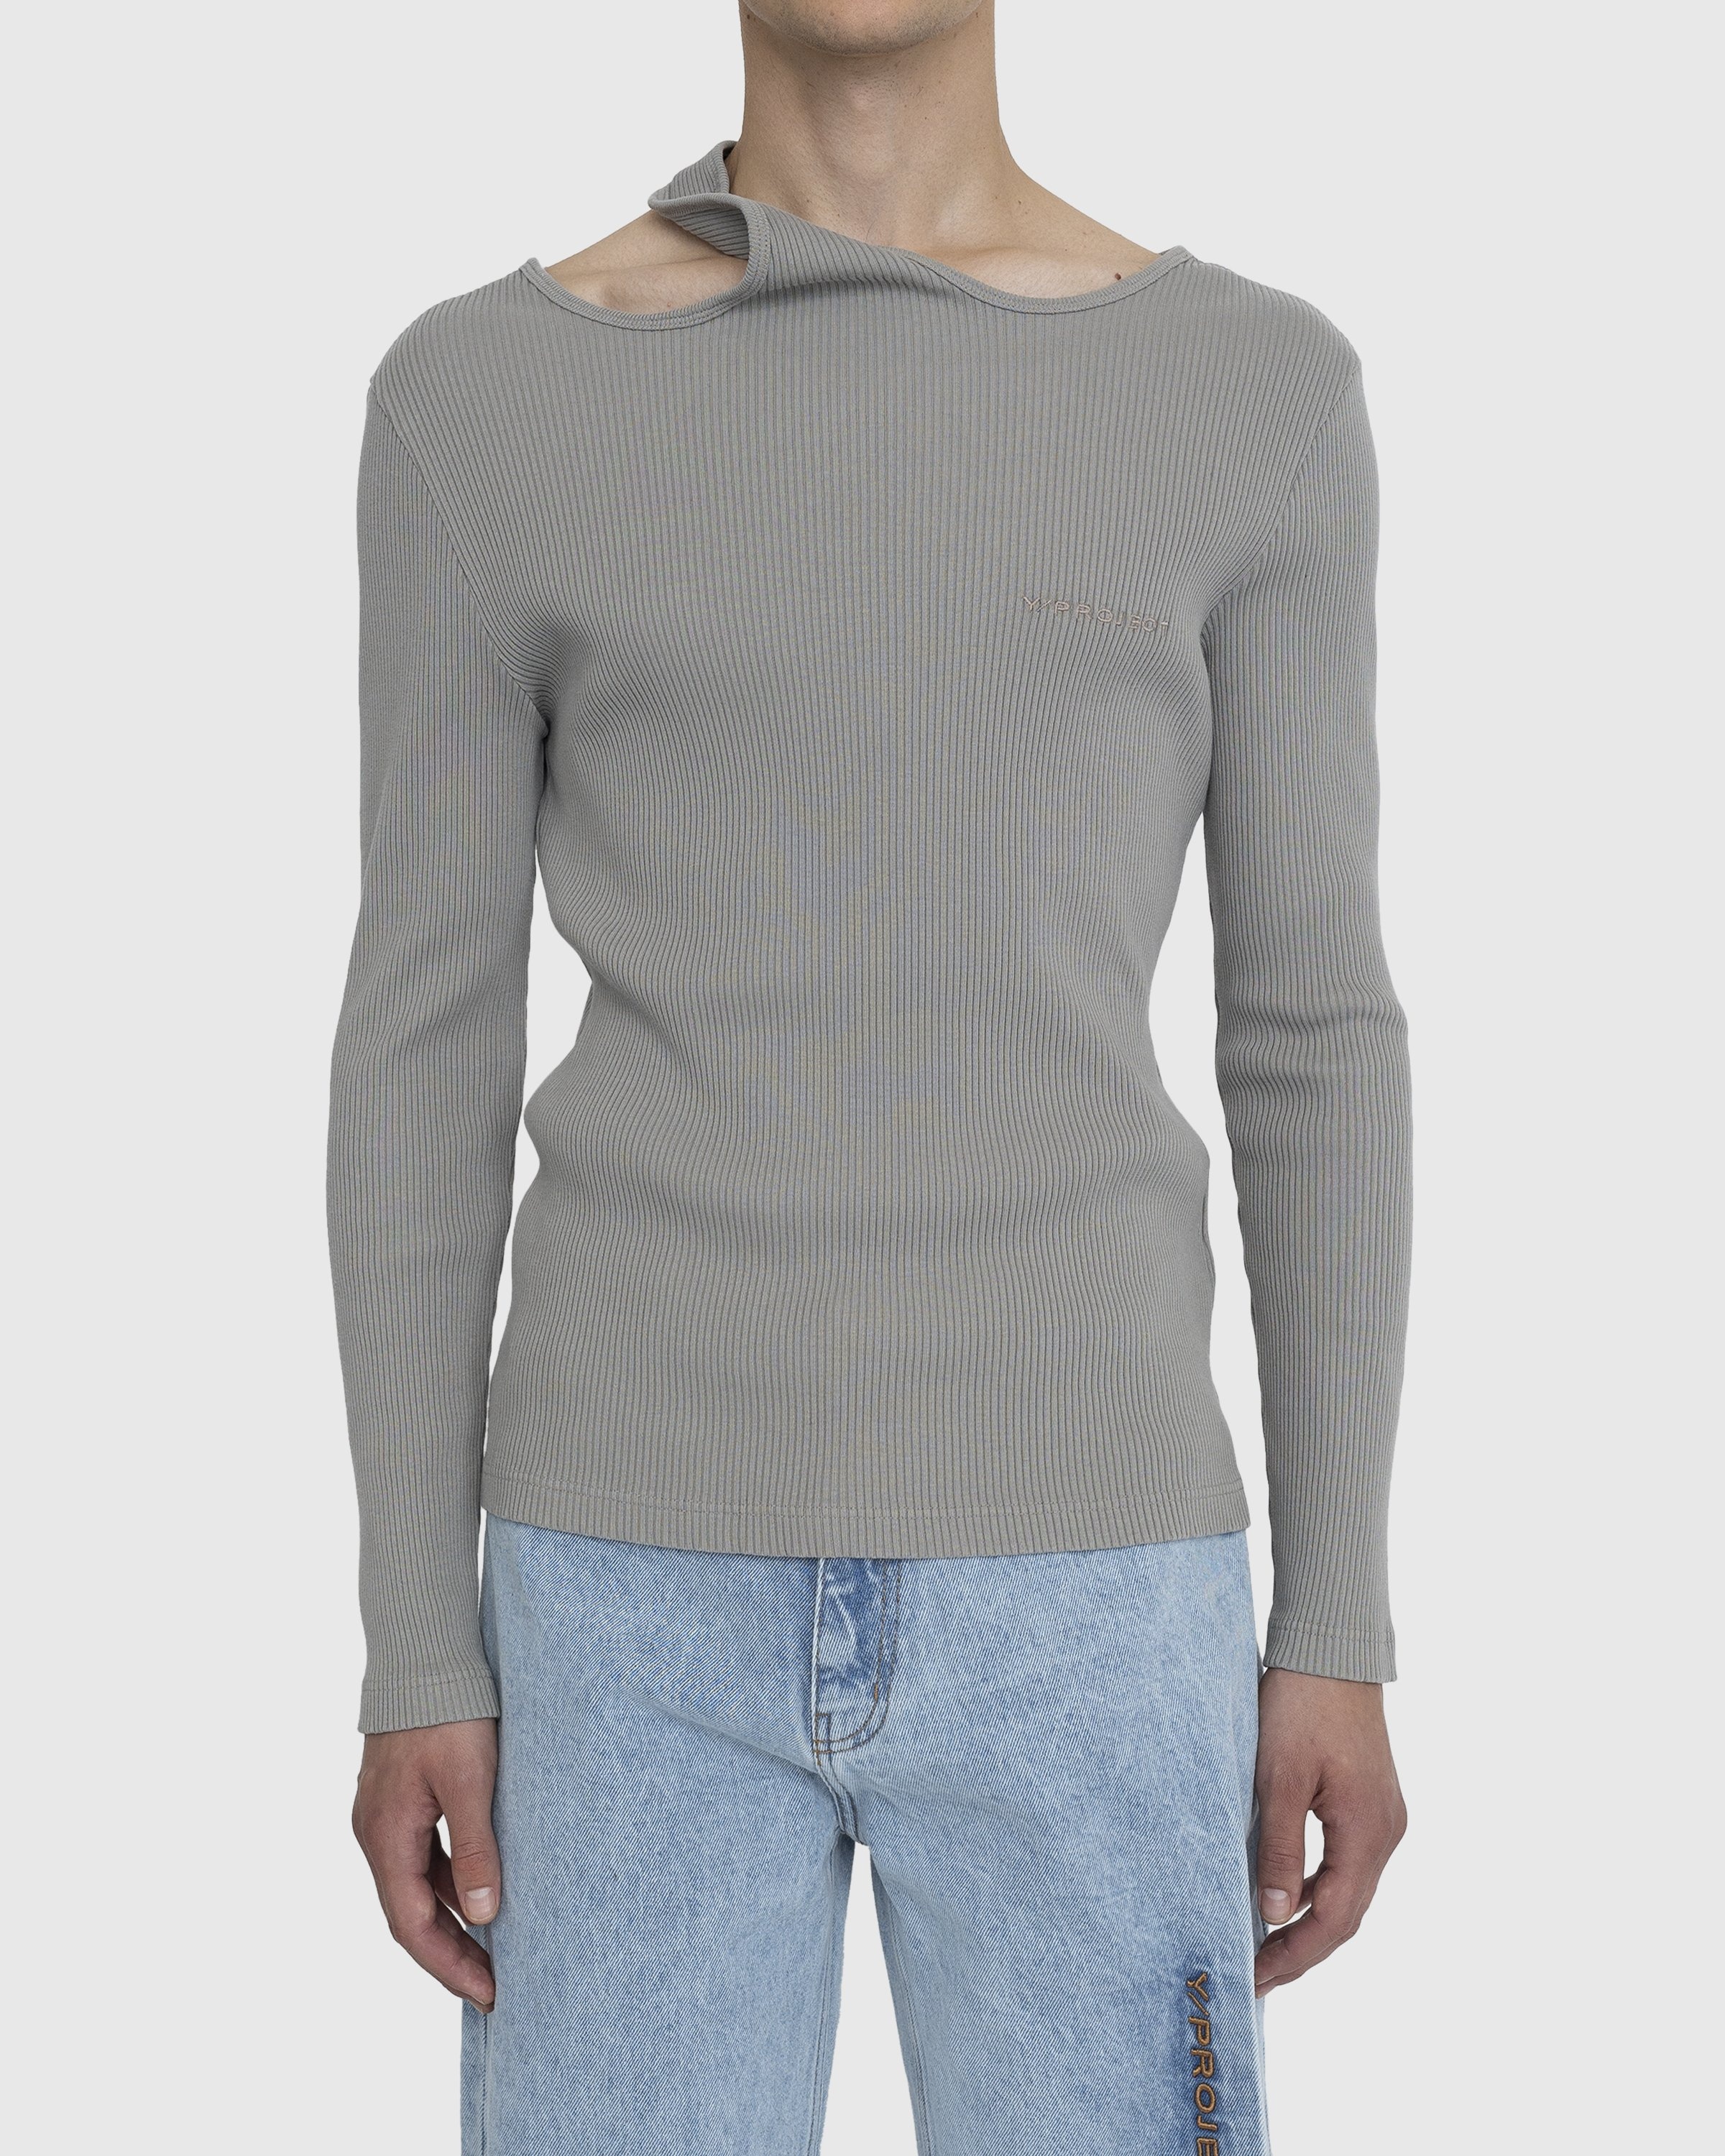 Y/Project – Classic Double Collar T-Shirt Taupe - Longsleeves - Grey - Image 2